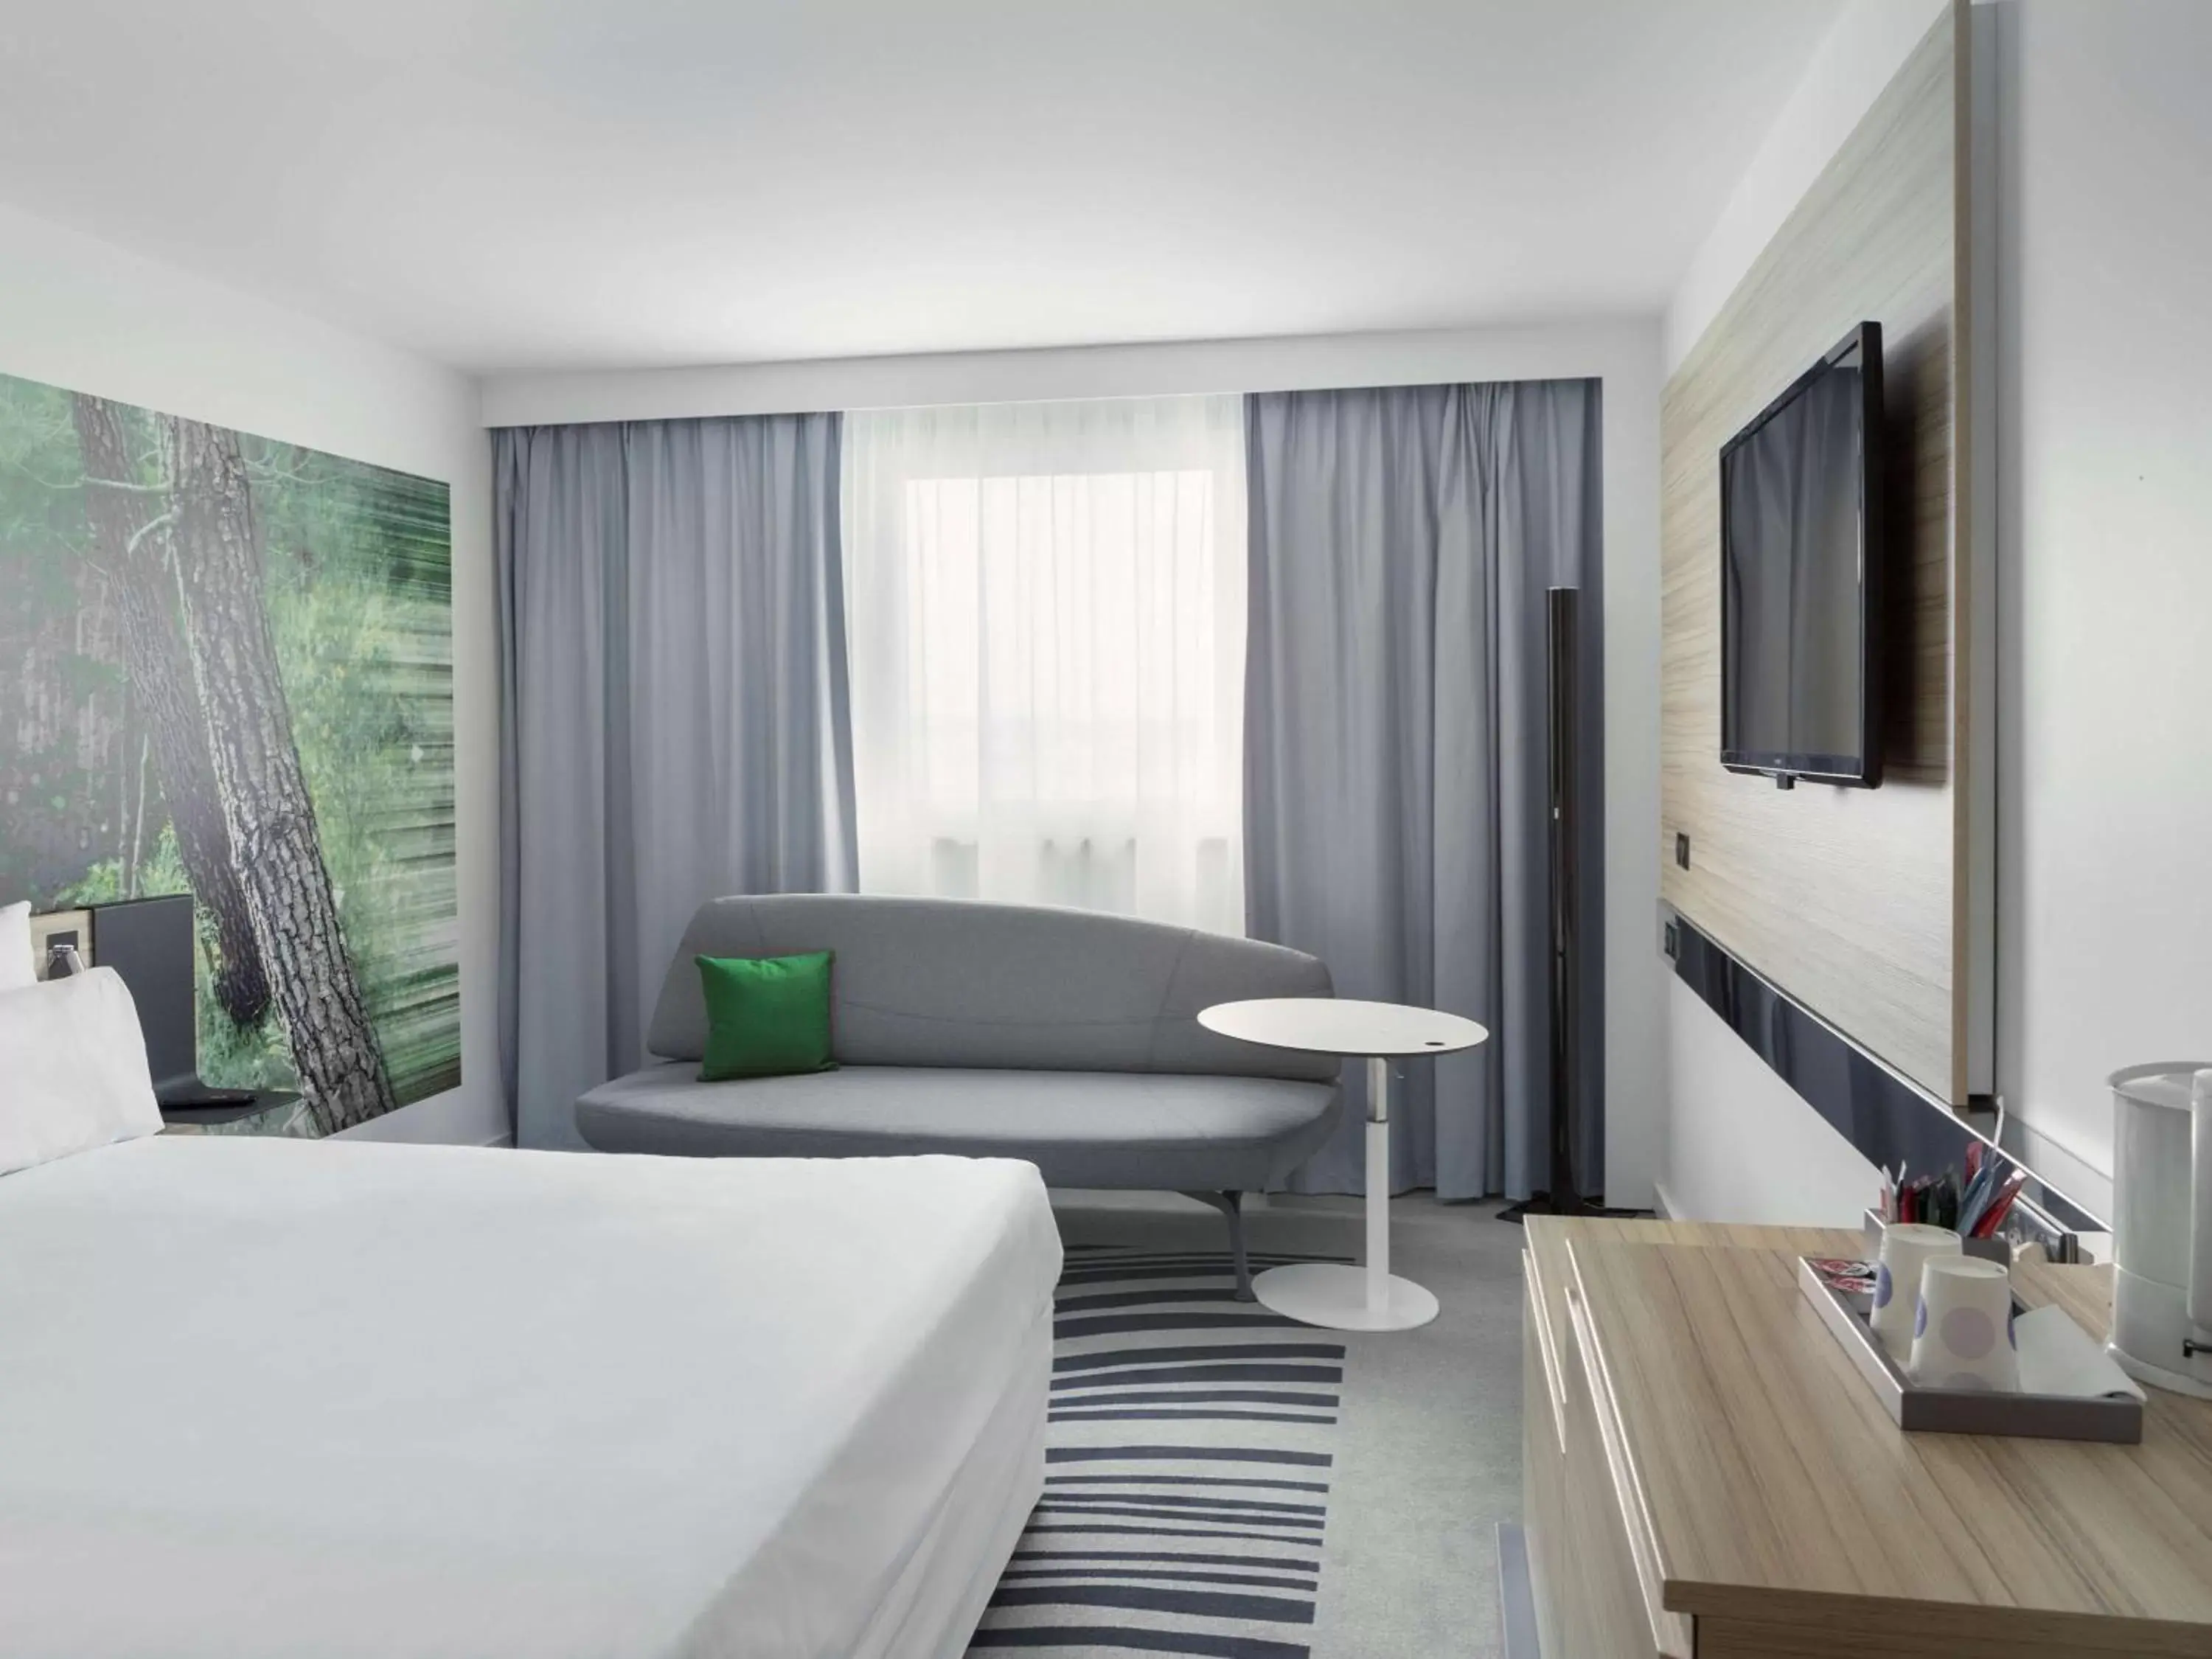 Superior Room with Double bed and a single Sofa Bed in Novotel Paris Charles de Gaulle Airport